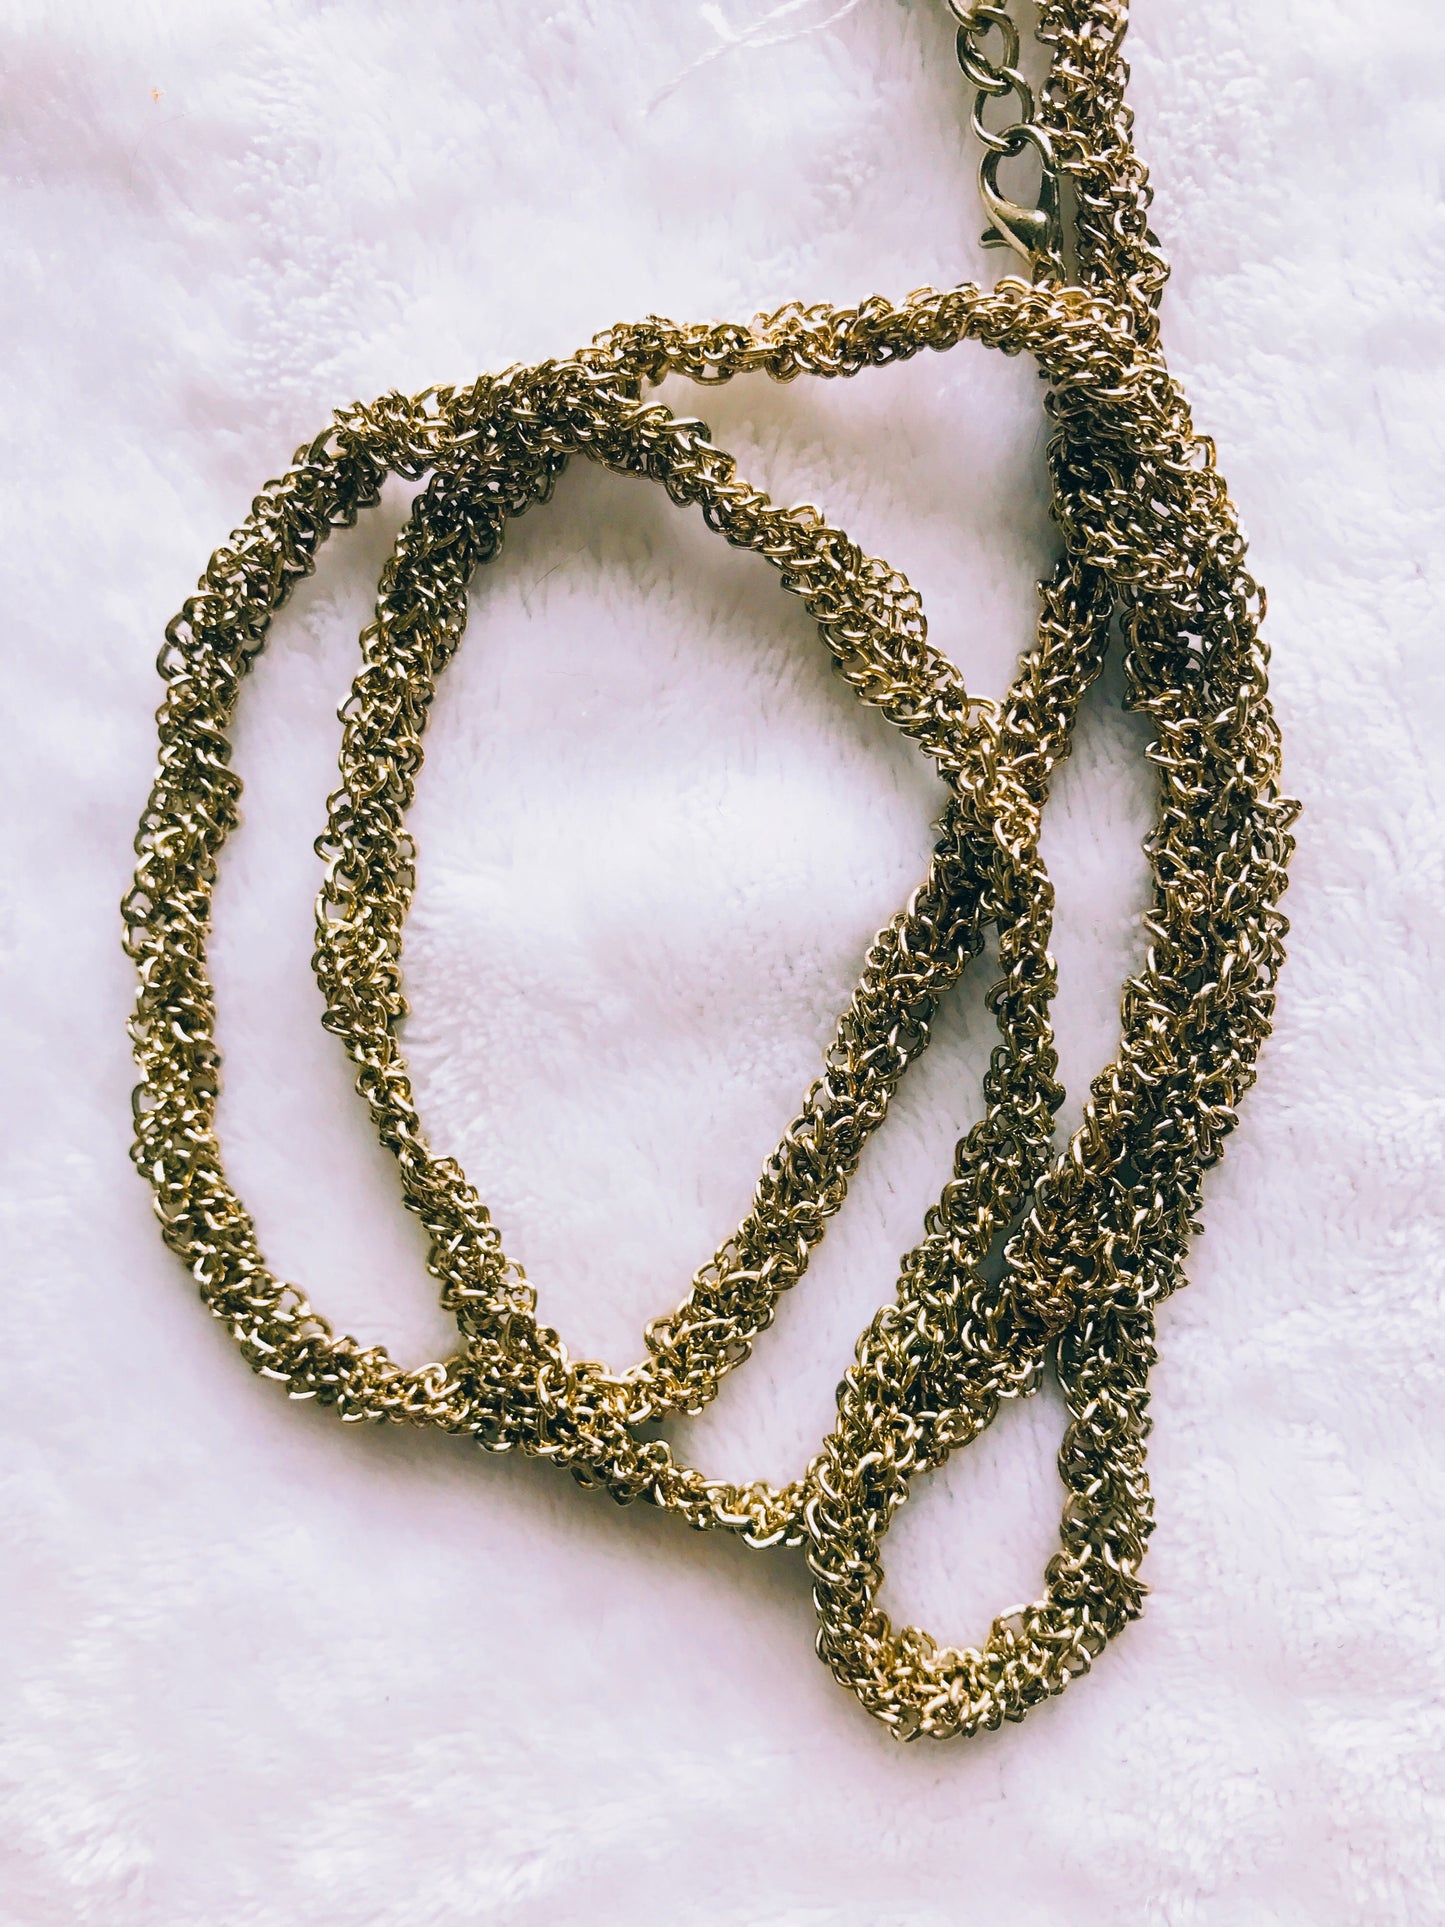 Vintage Messy Tangle Chain